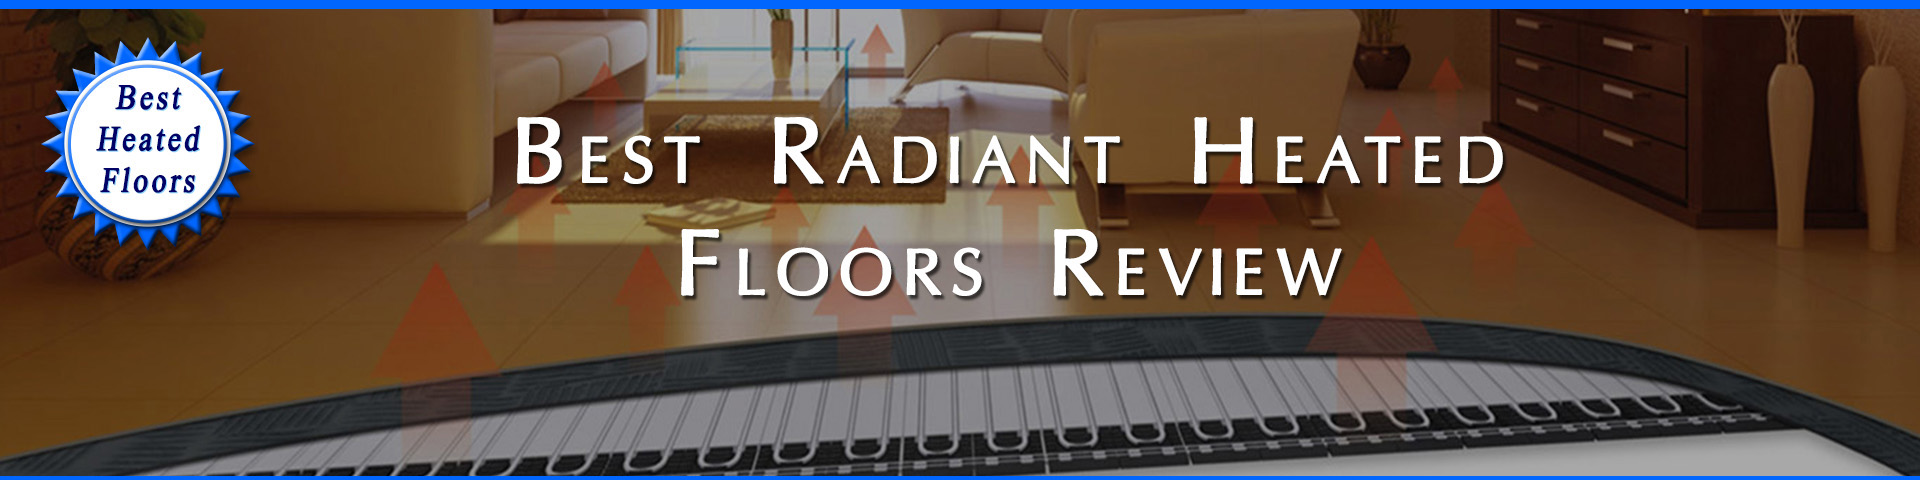 Best radiant heated floor systems banner.